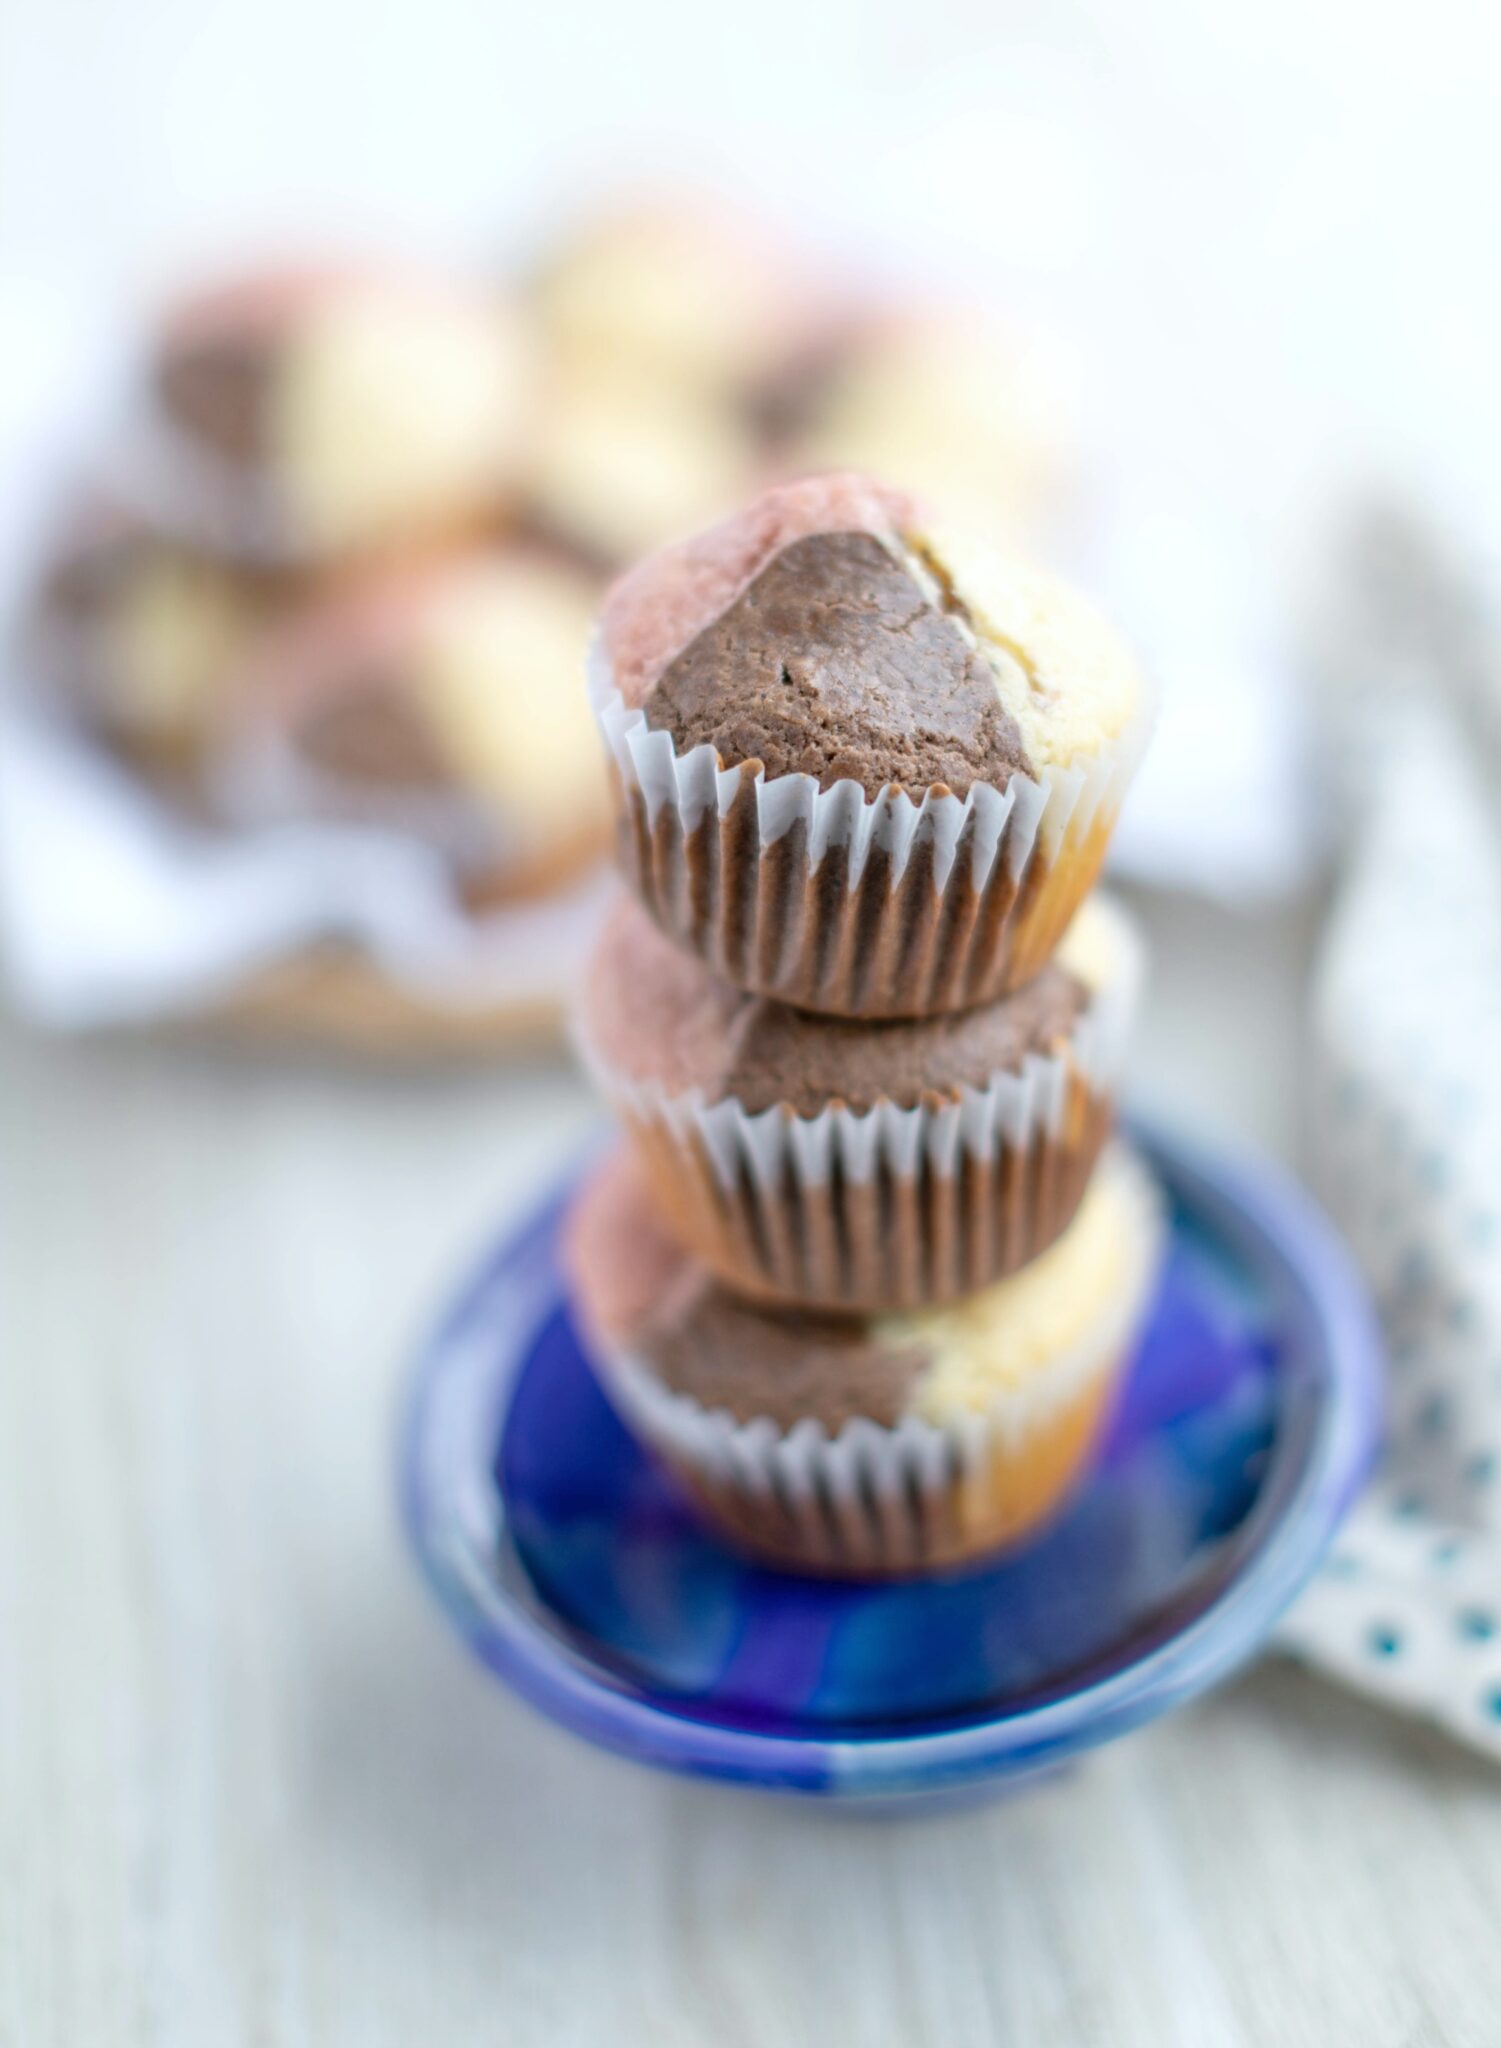 A stack of 3 Neapolitan Ice Cream muffins are on a navy blue dish.  Behind it, you can see a whole plate of muffins.